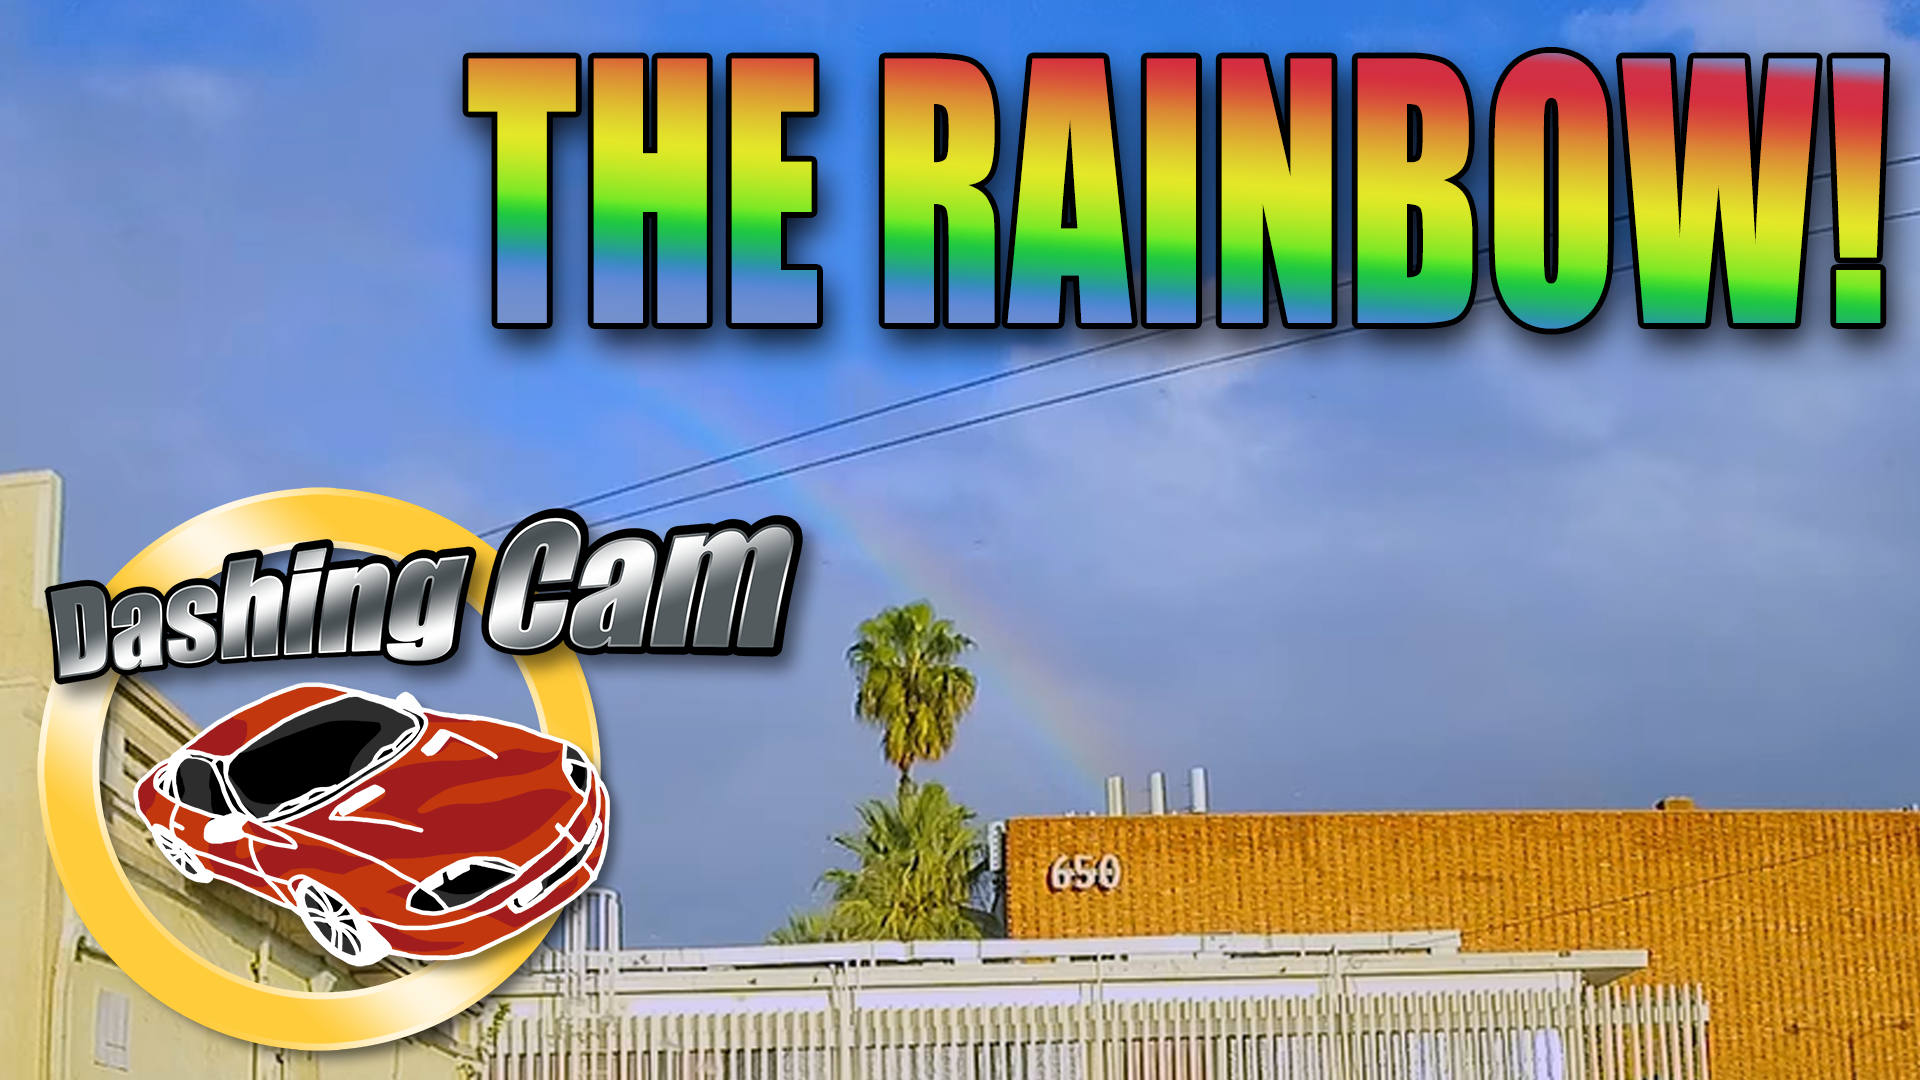 DashingCam_TheRainbow.png